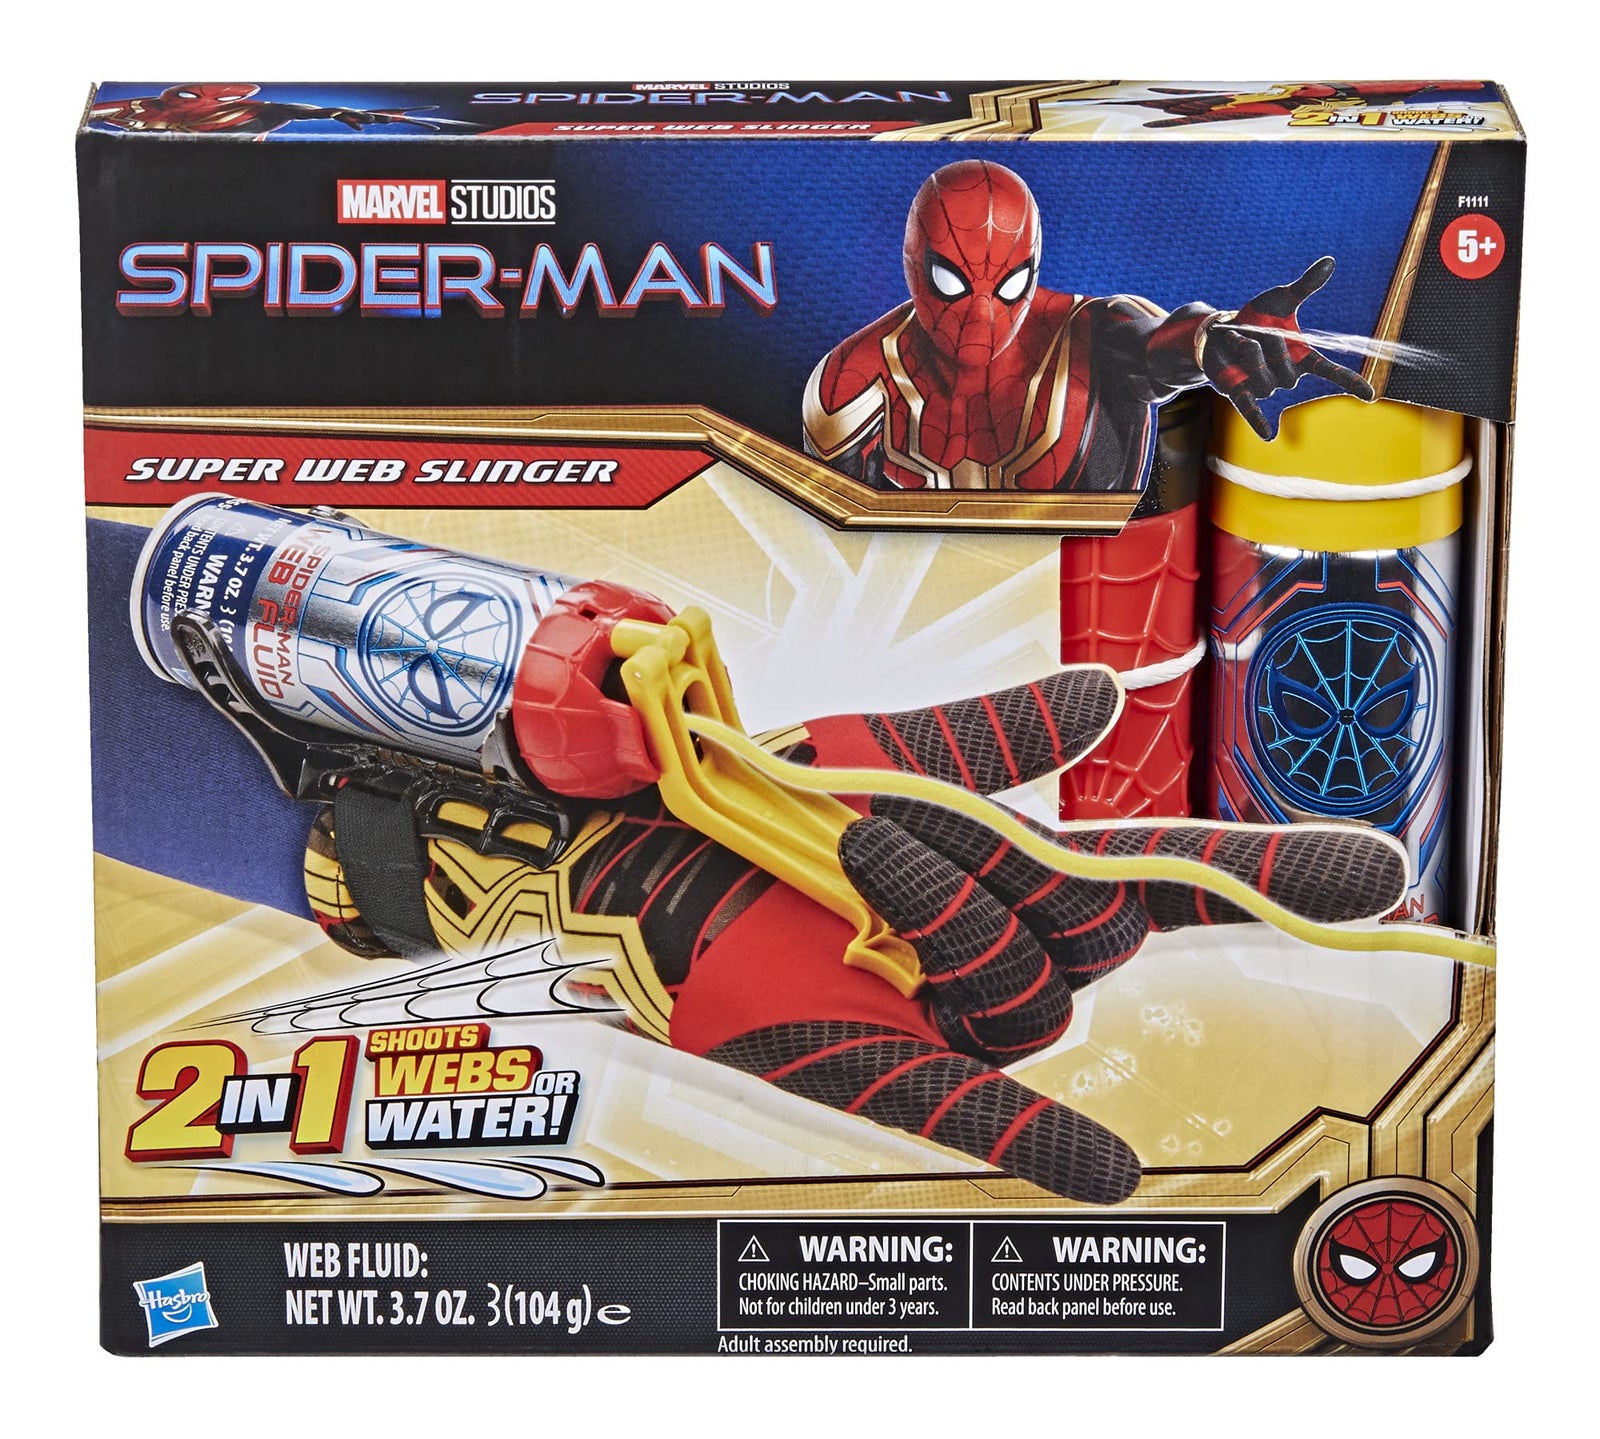 Spider-Man Hasbro Marvel Super Web Slinger Role-Play Toy, Includes Web Fluid, 2-in-1 Shoots Webs or Water, for Kids Ages 5 and Up